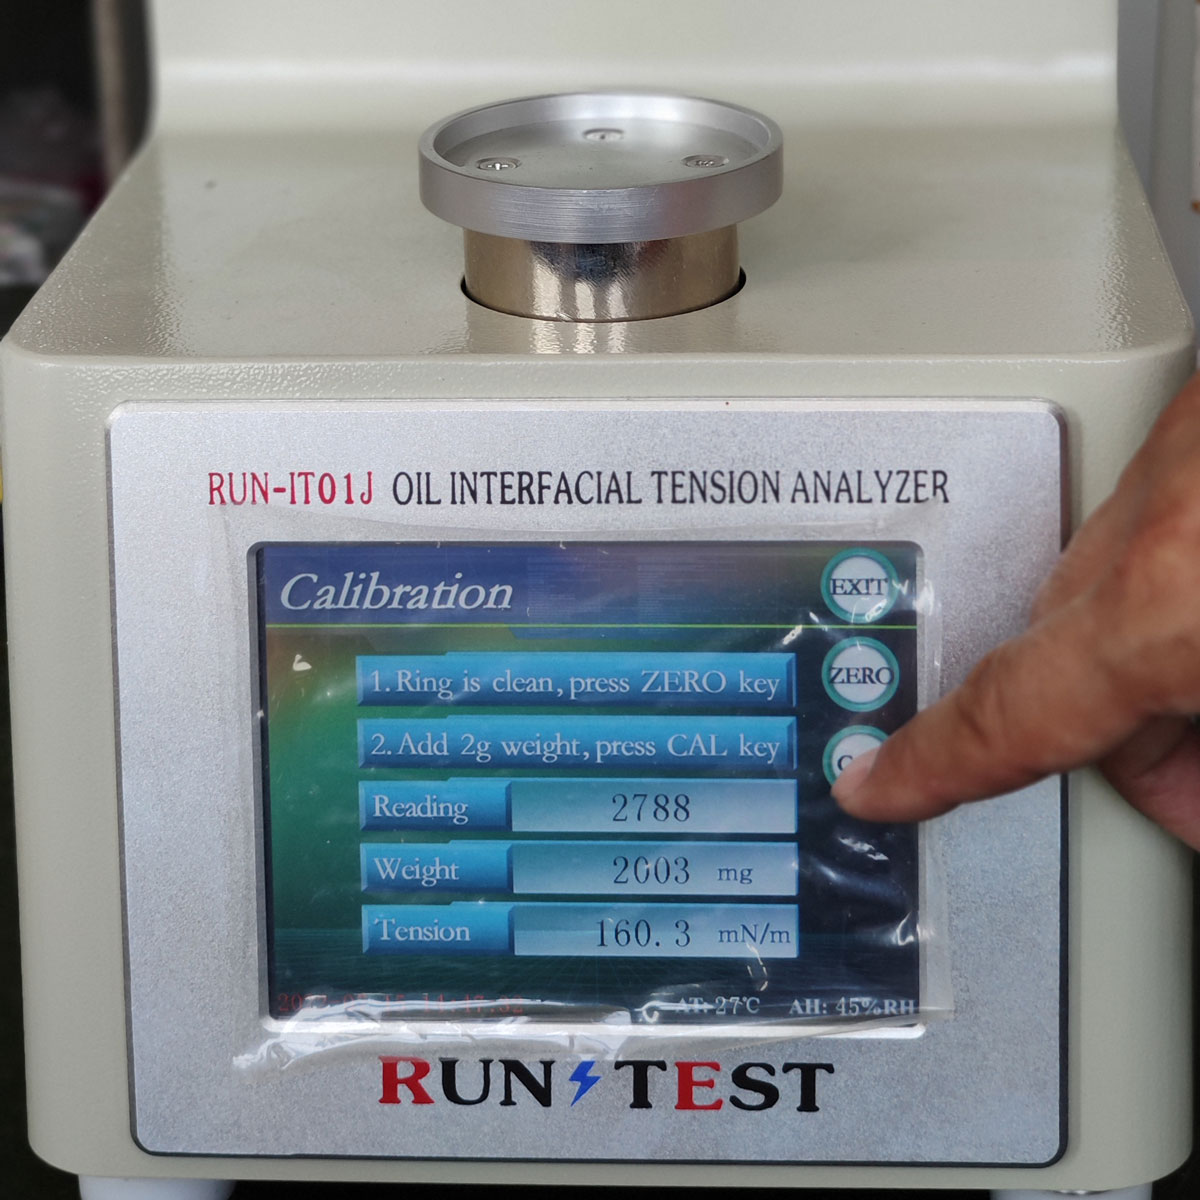 How to use the oil interfacial tension tester?